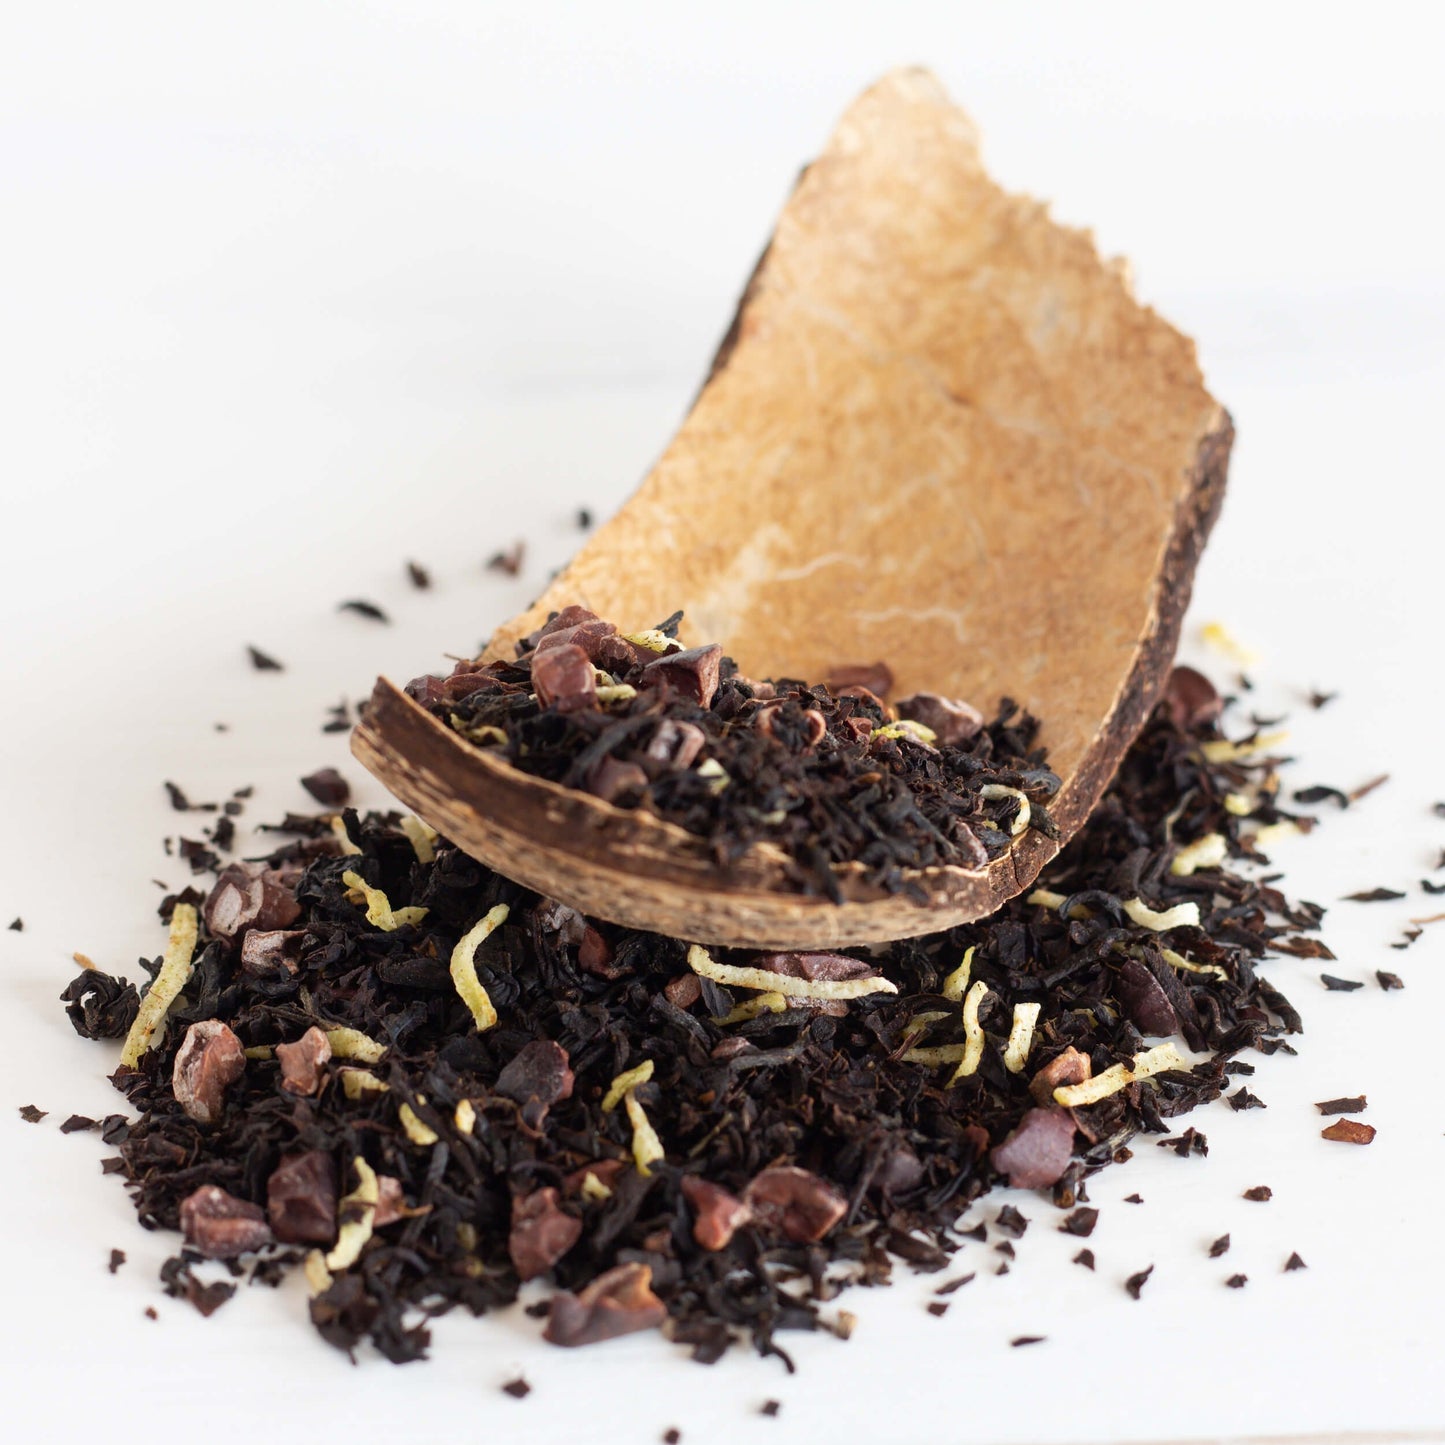 Coco Loco Organic Black Tea shown as loose tea leaves spilling out of a coconut shell